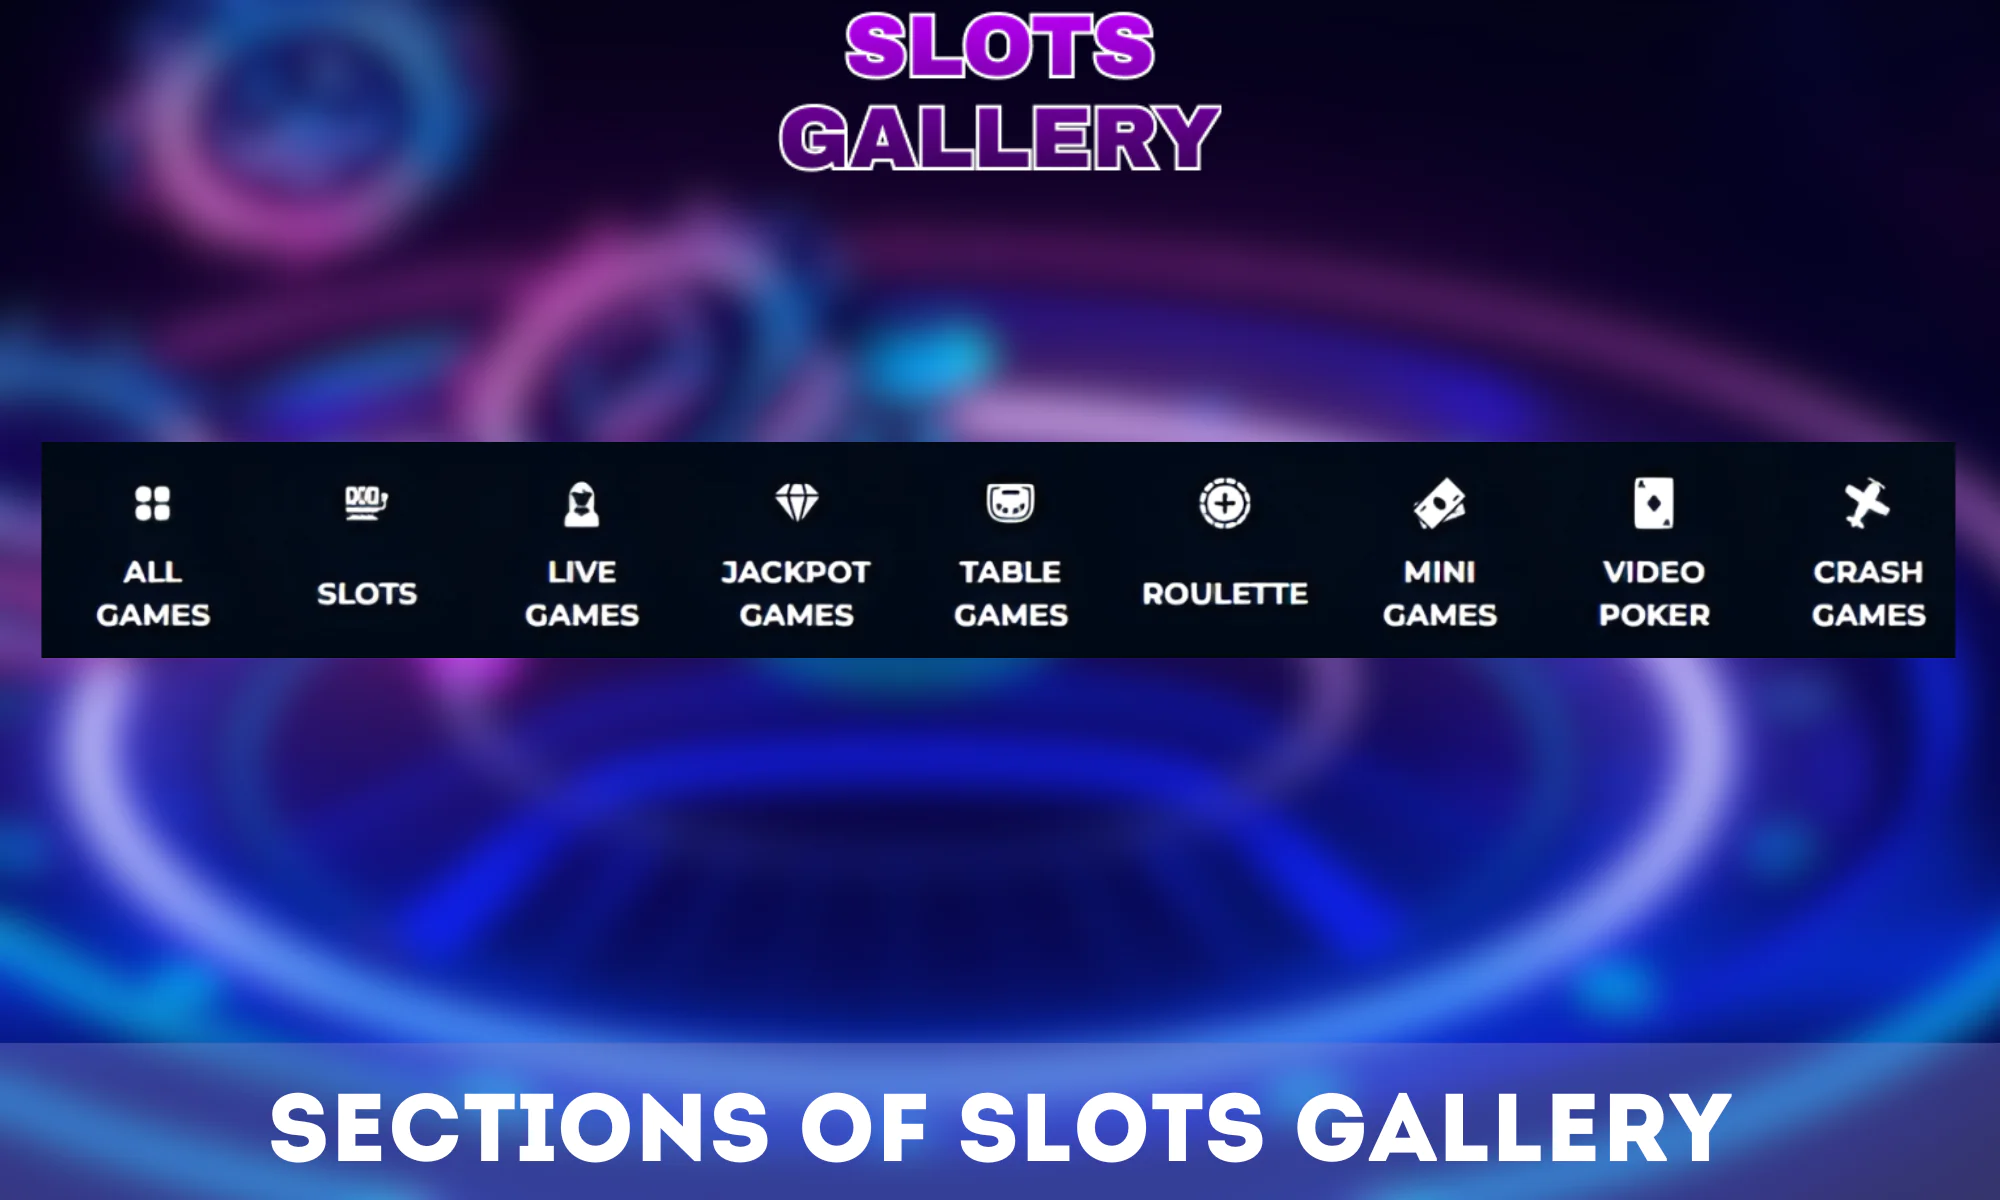 Slots Gallery offers popular games at online casinos